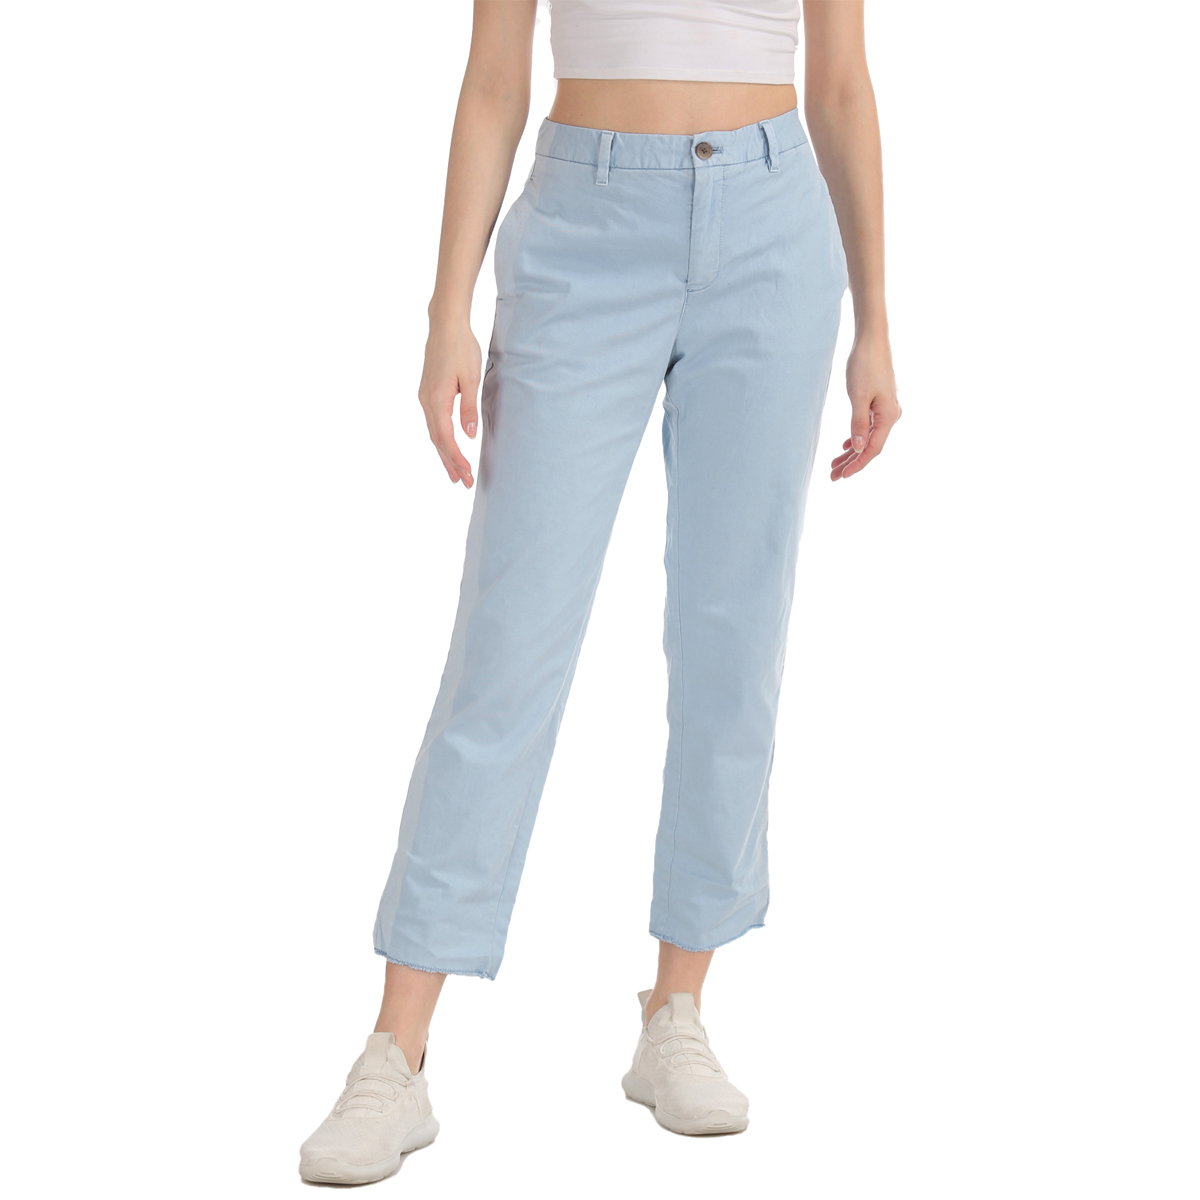 Gap Mid Rise Girlfriend Fit Solid Color Trouser Styled with Raw Hem & Faded Side Seam Line - Blue, Size-6